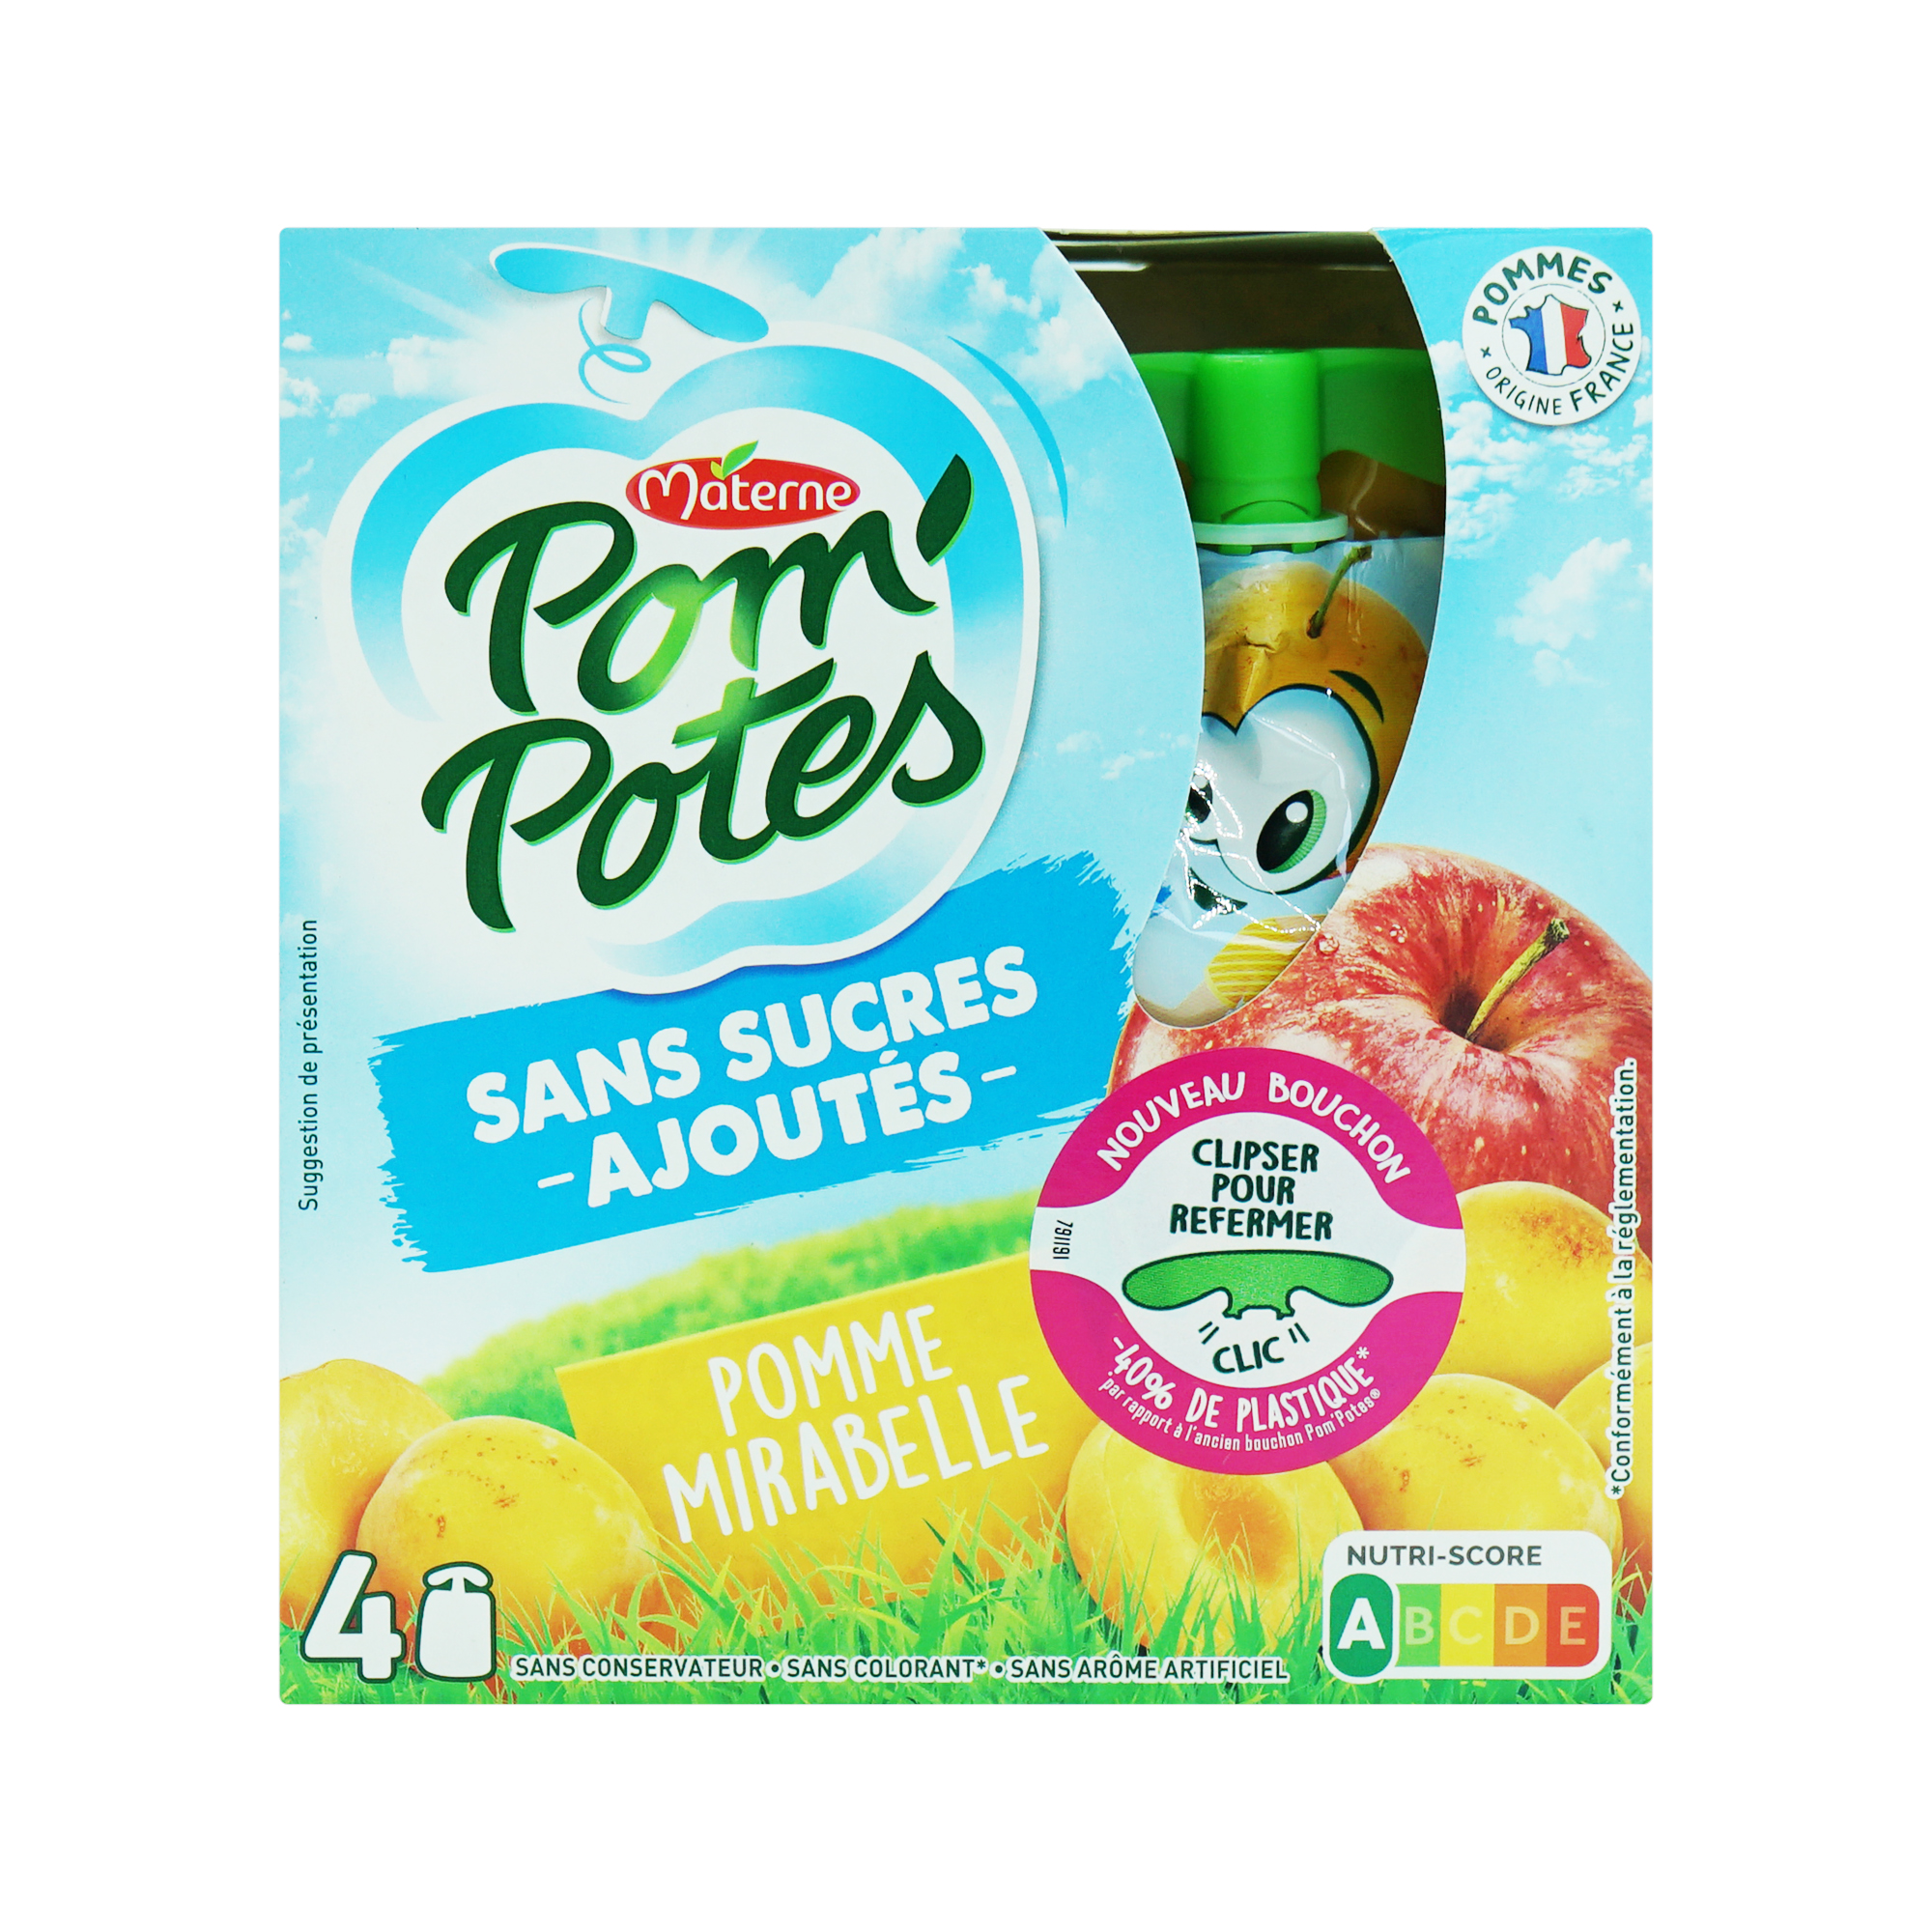 Materne Pom'Potes Apple/Mirabelle Puree No Added Sugar (4x90g)